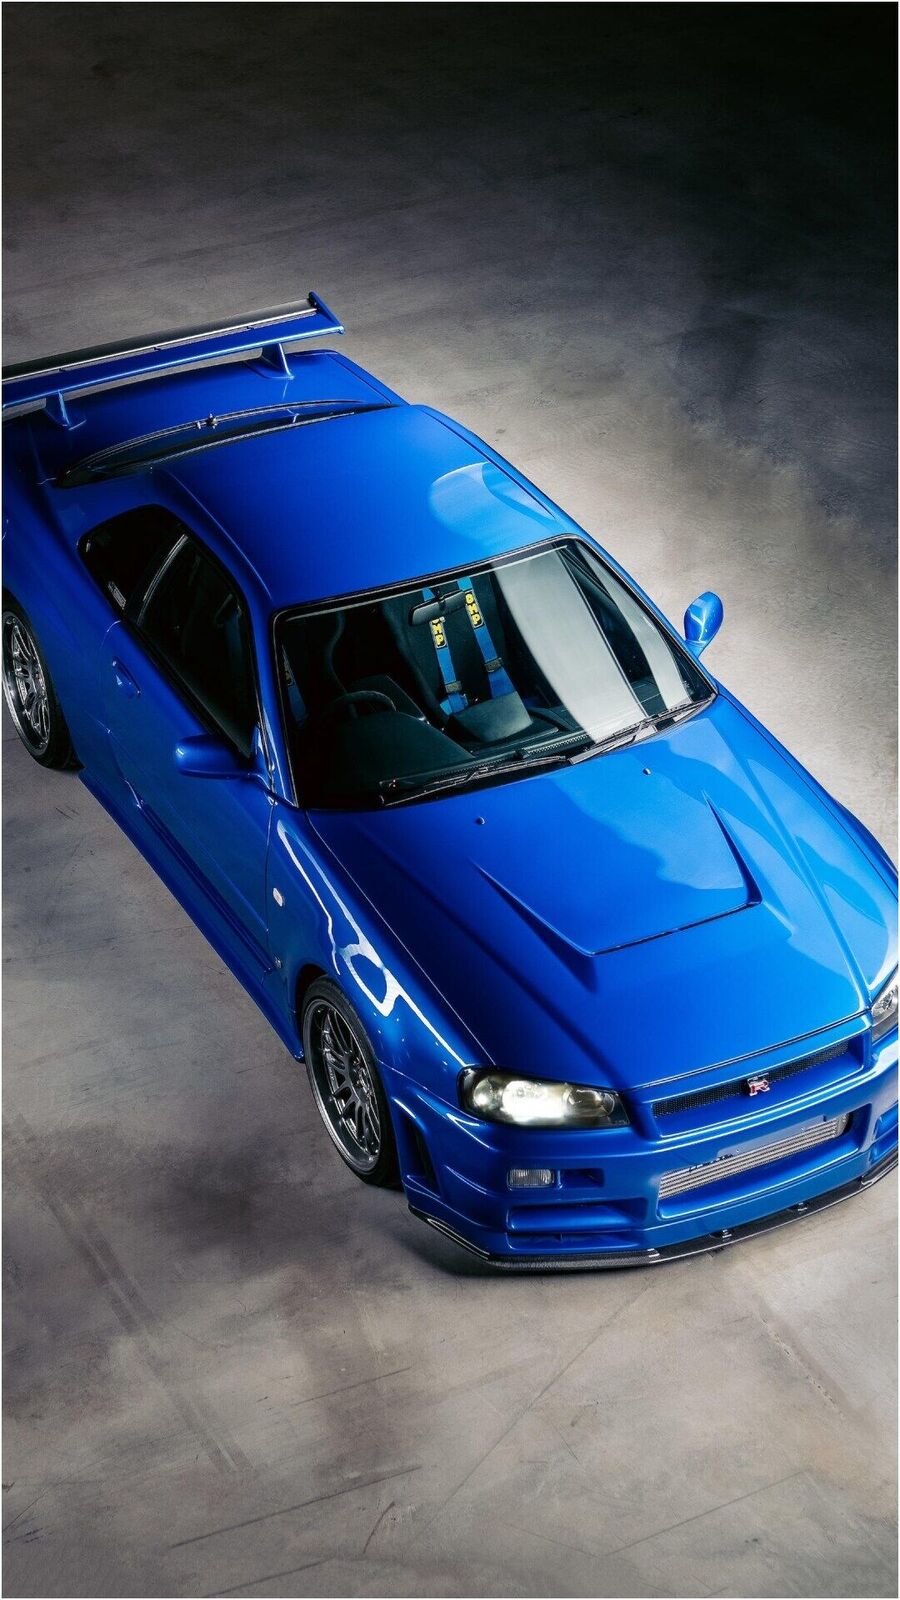 Paul Walker's R34 Skyline From Fast & Furious Up For Sale